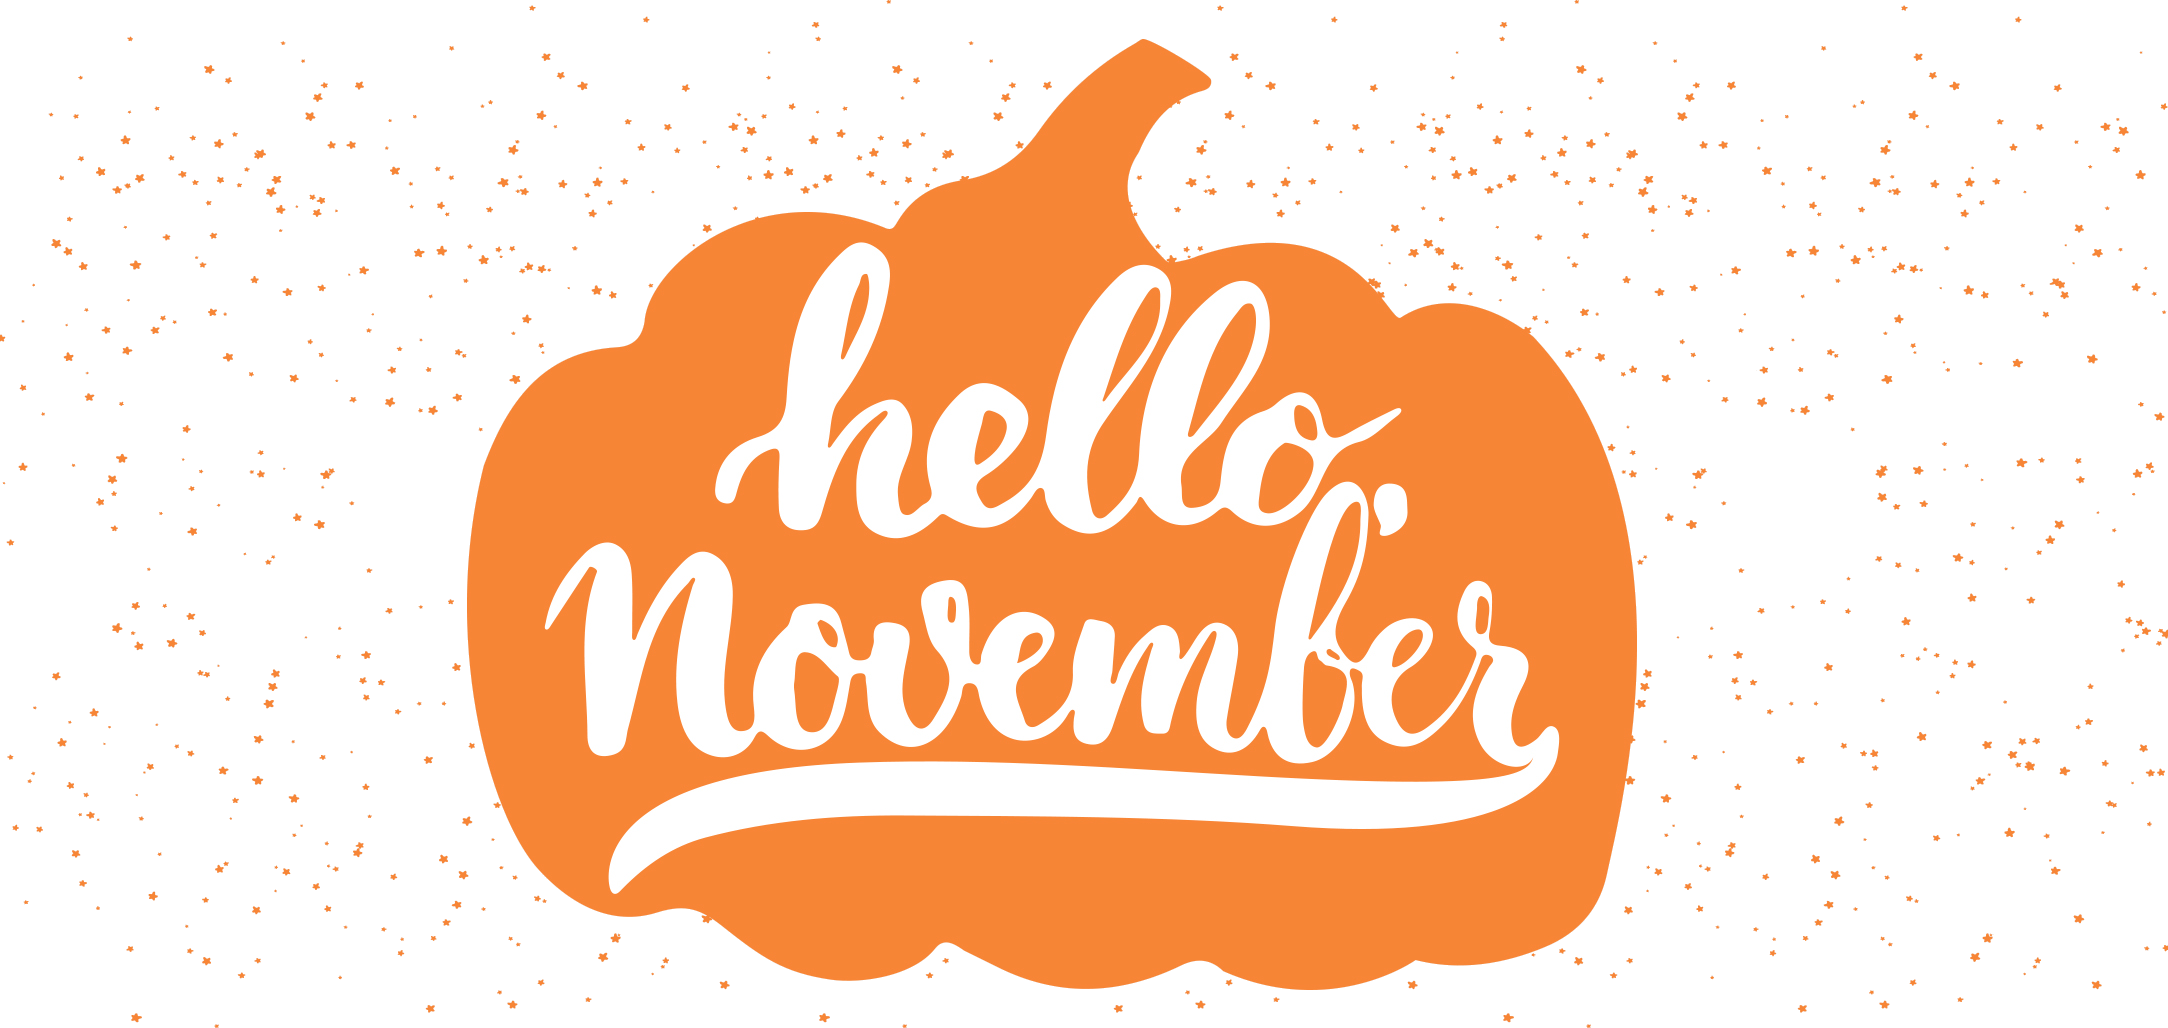 Hello November Png Png All